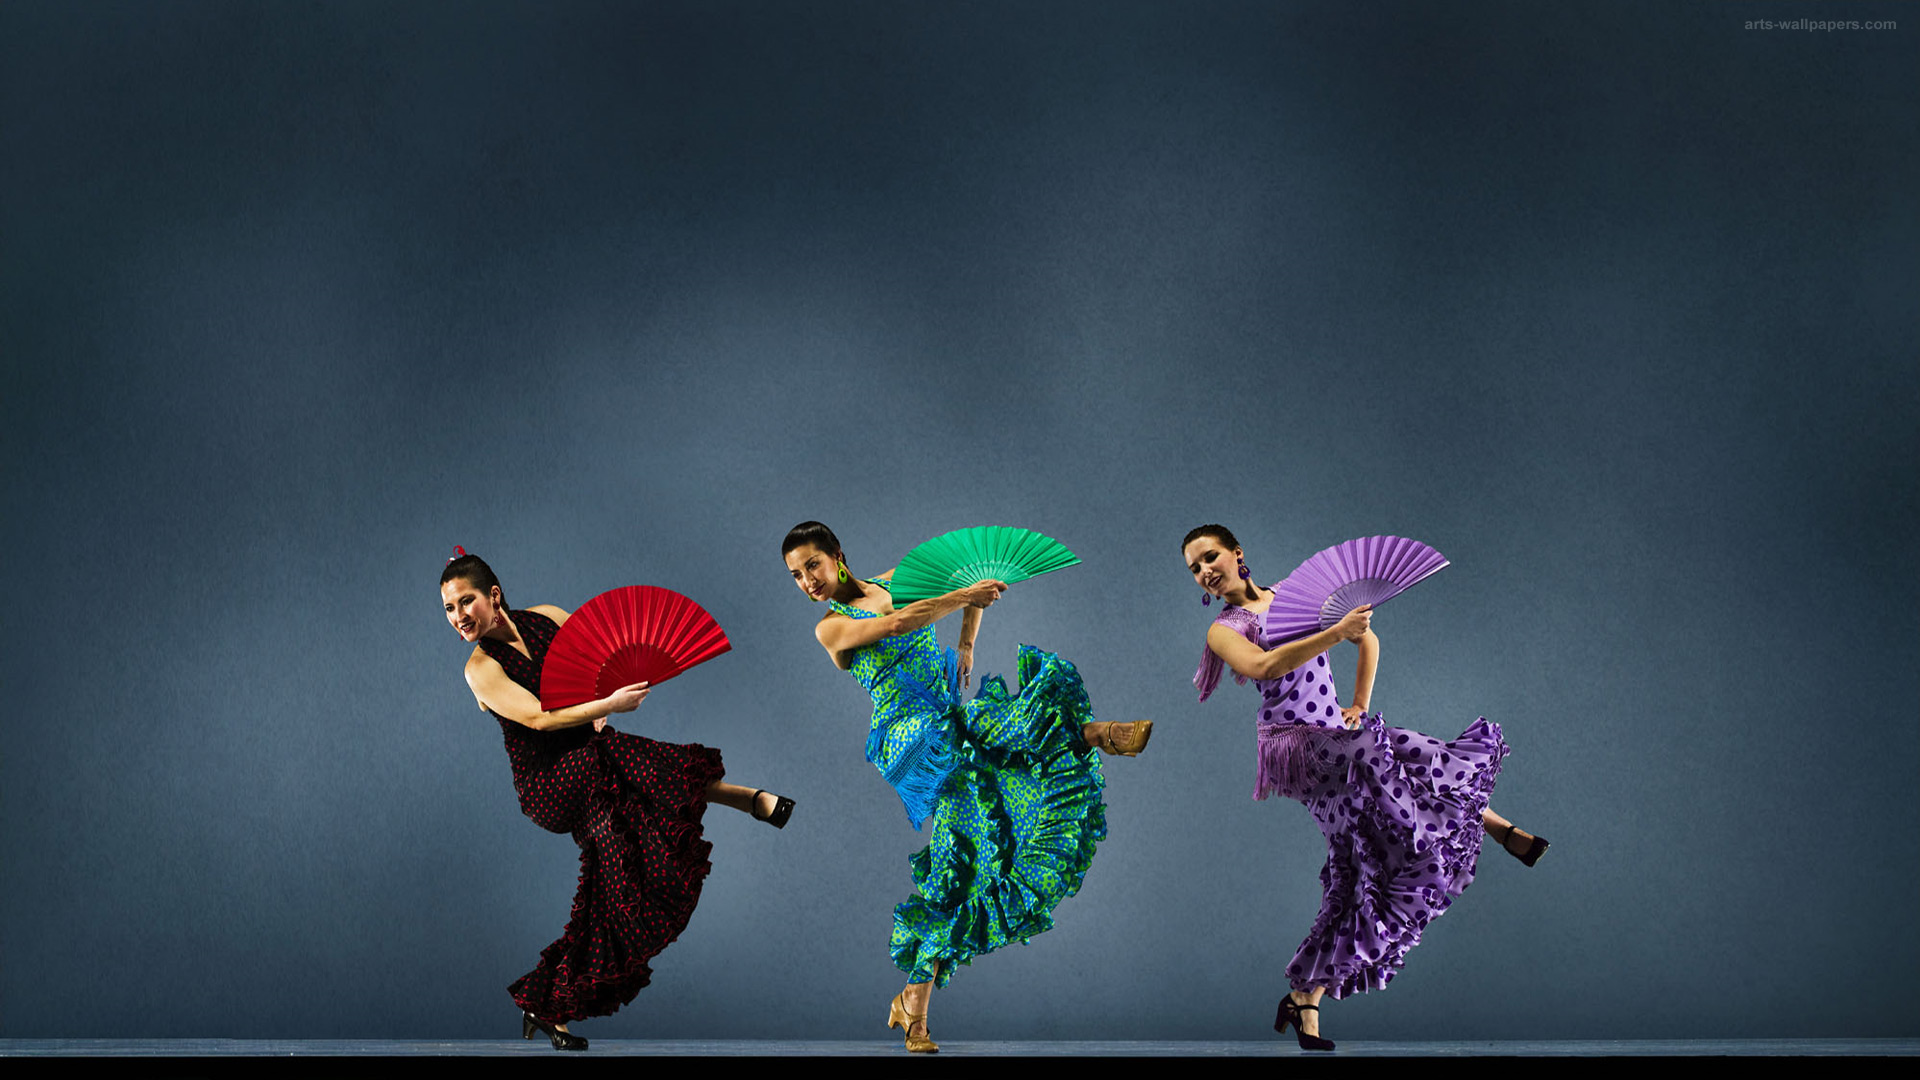 Flamenco Image HD Wallpaper And Background